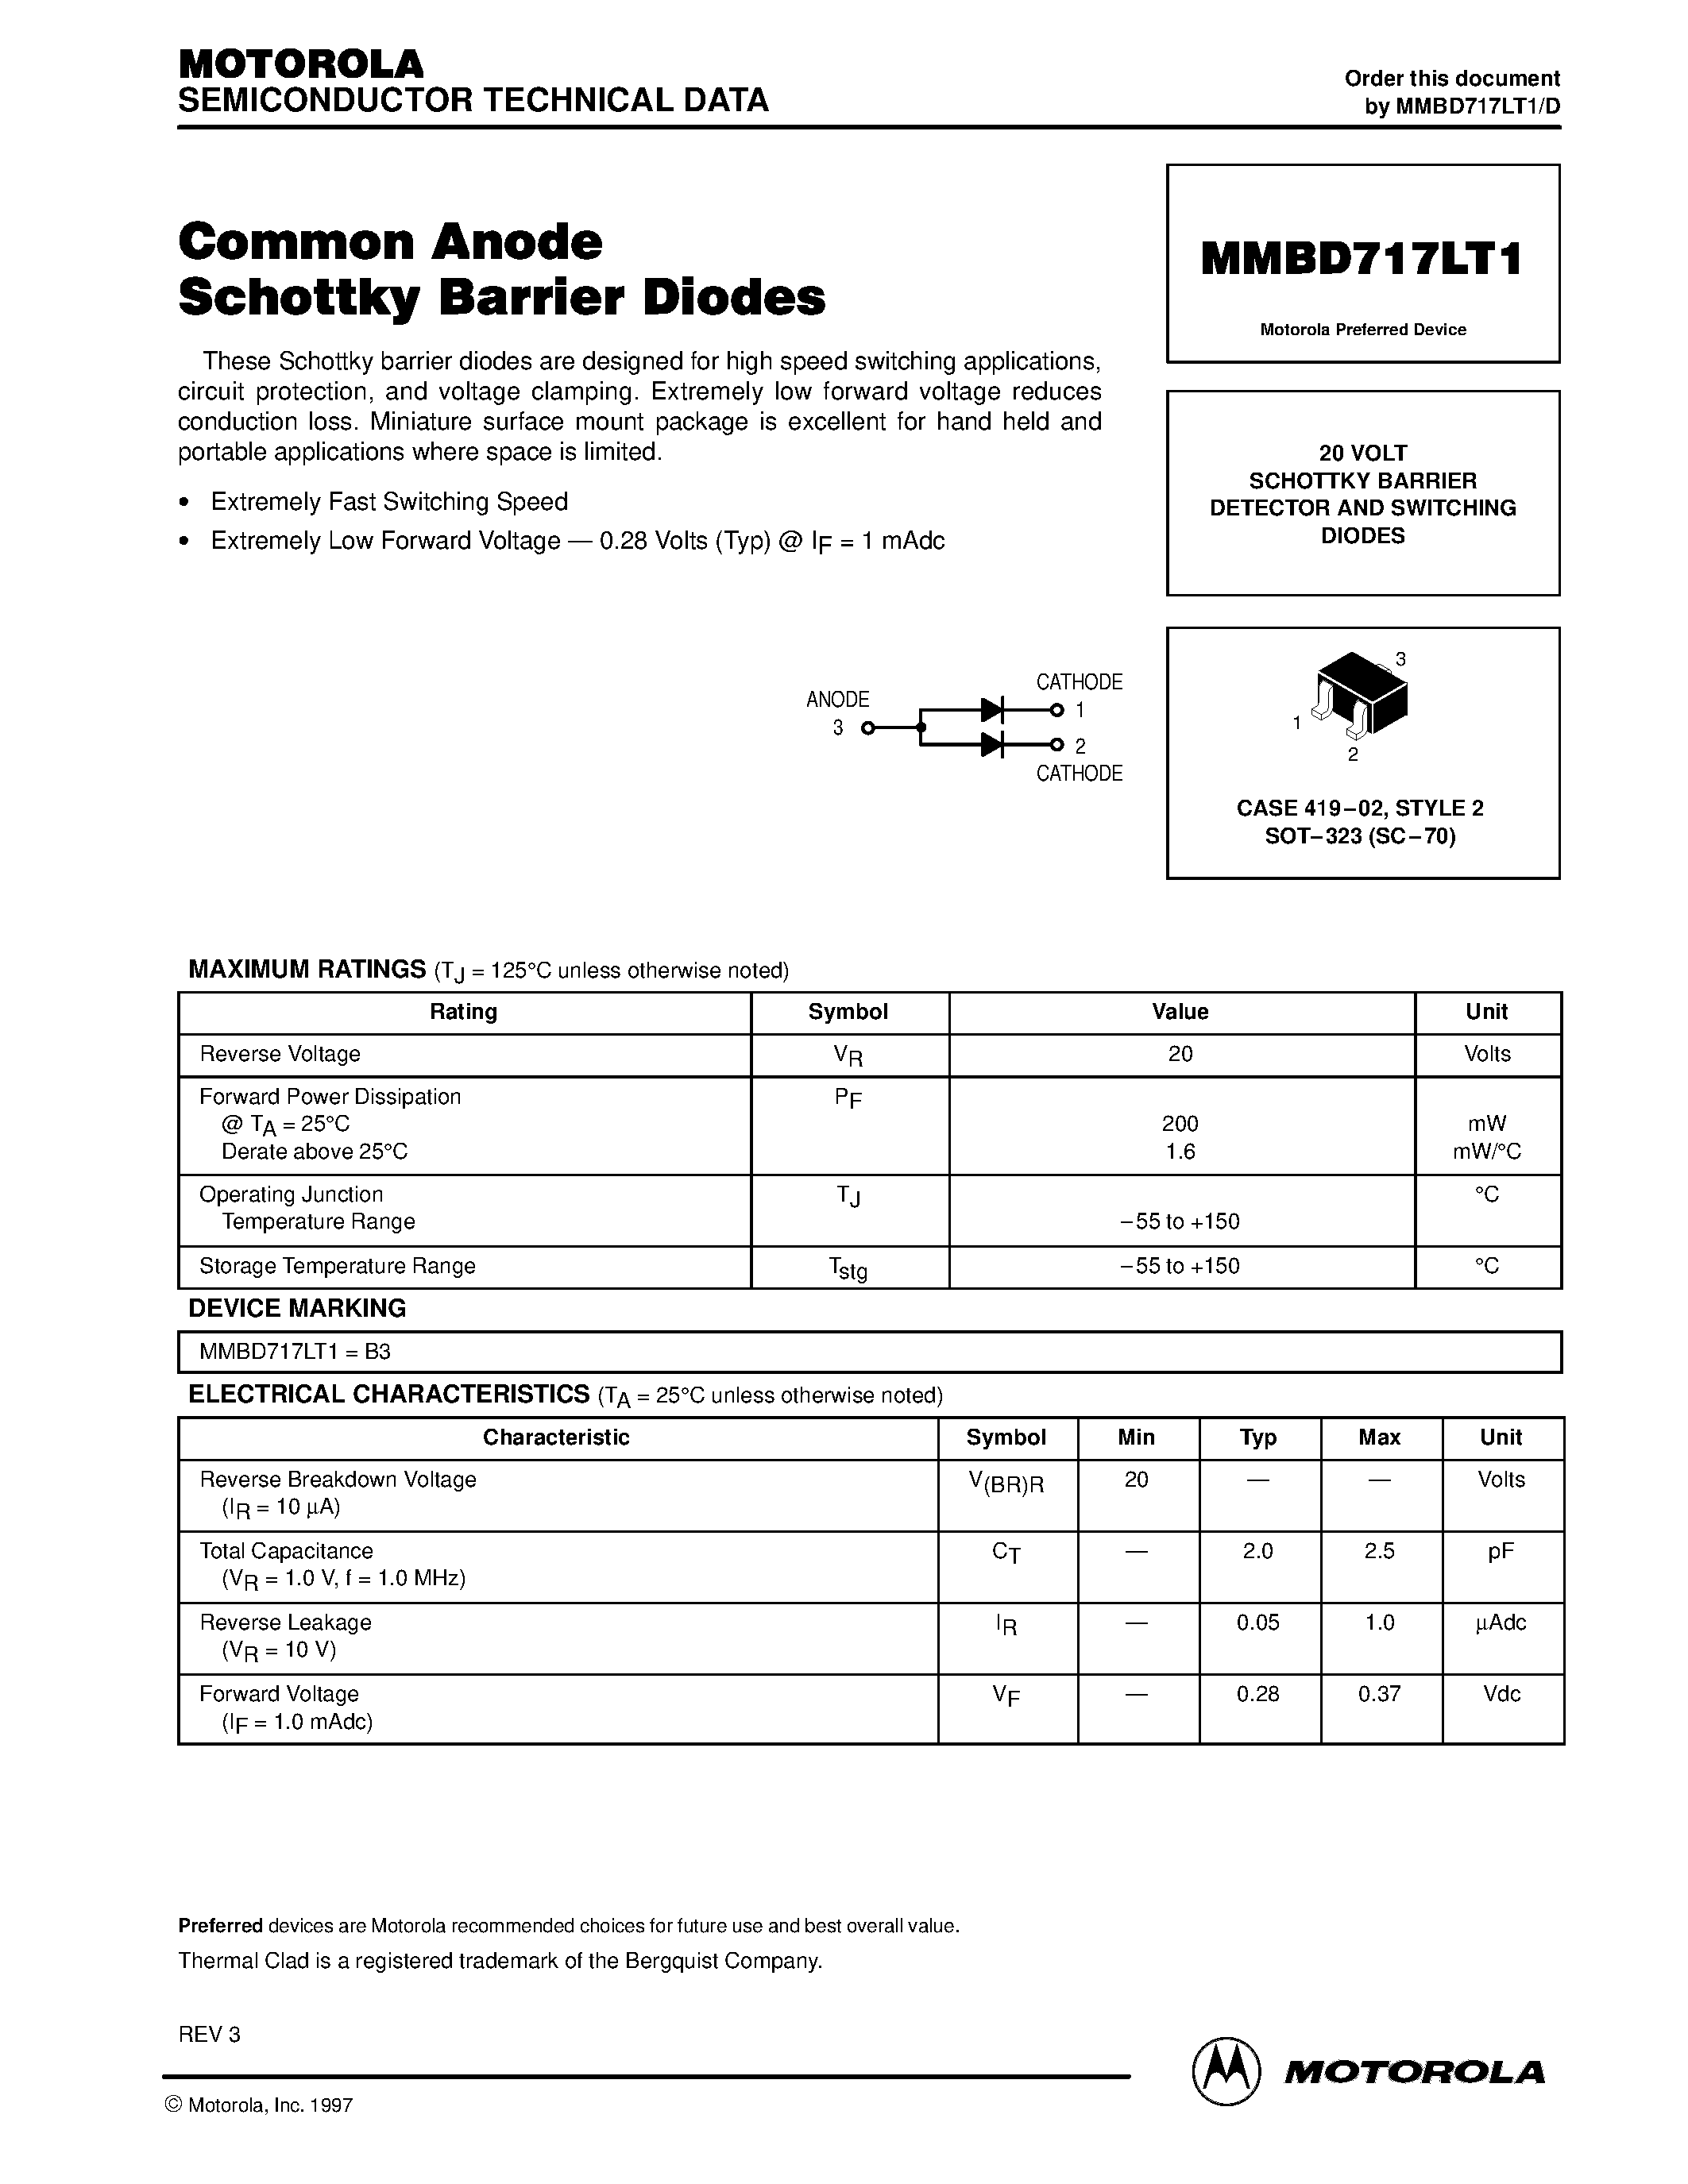 Datasheet MMBD717 - Common Anode Schottky Barrier Diodes page 1